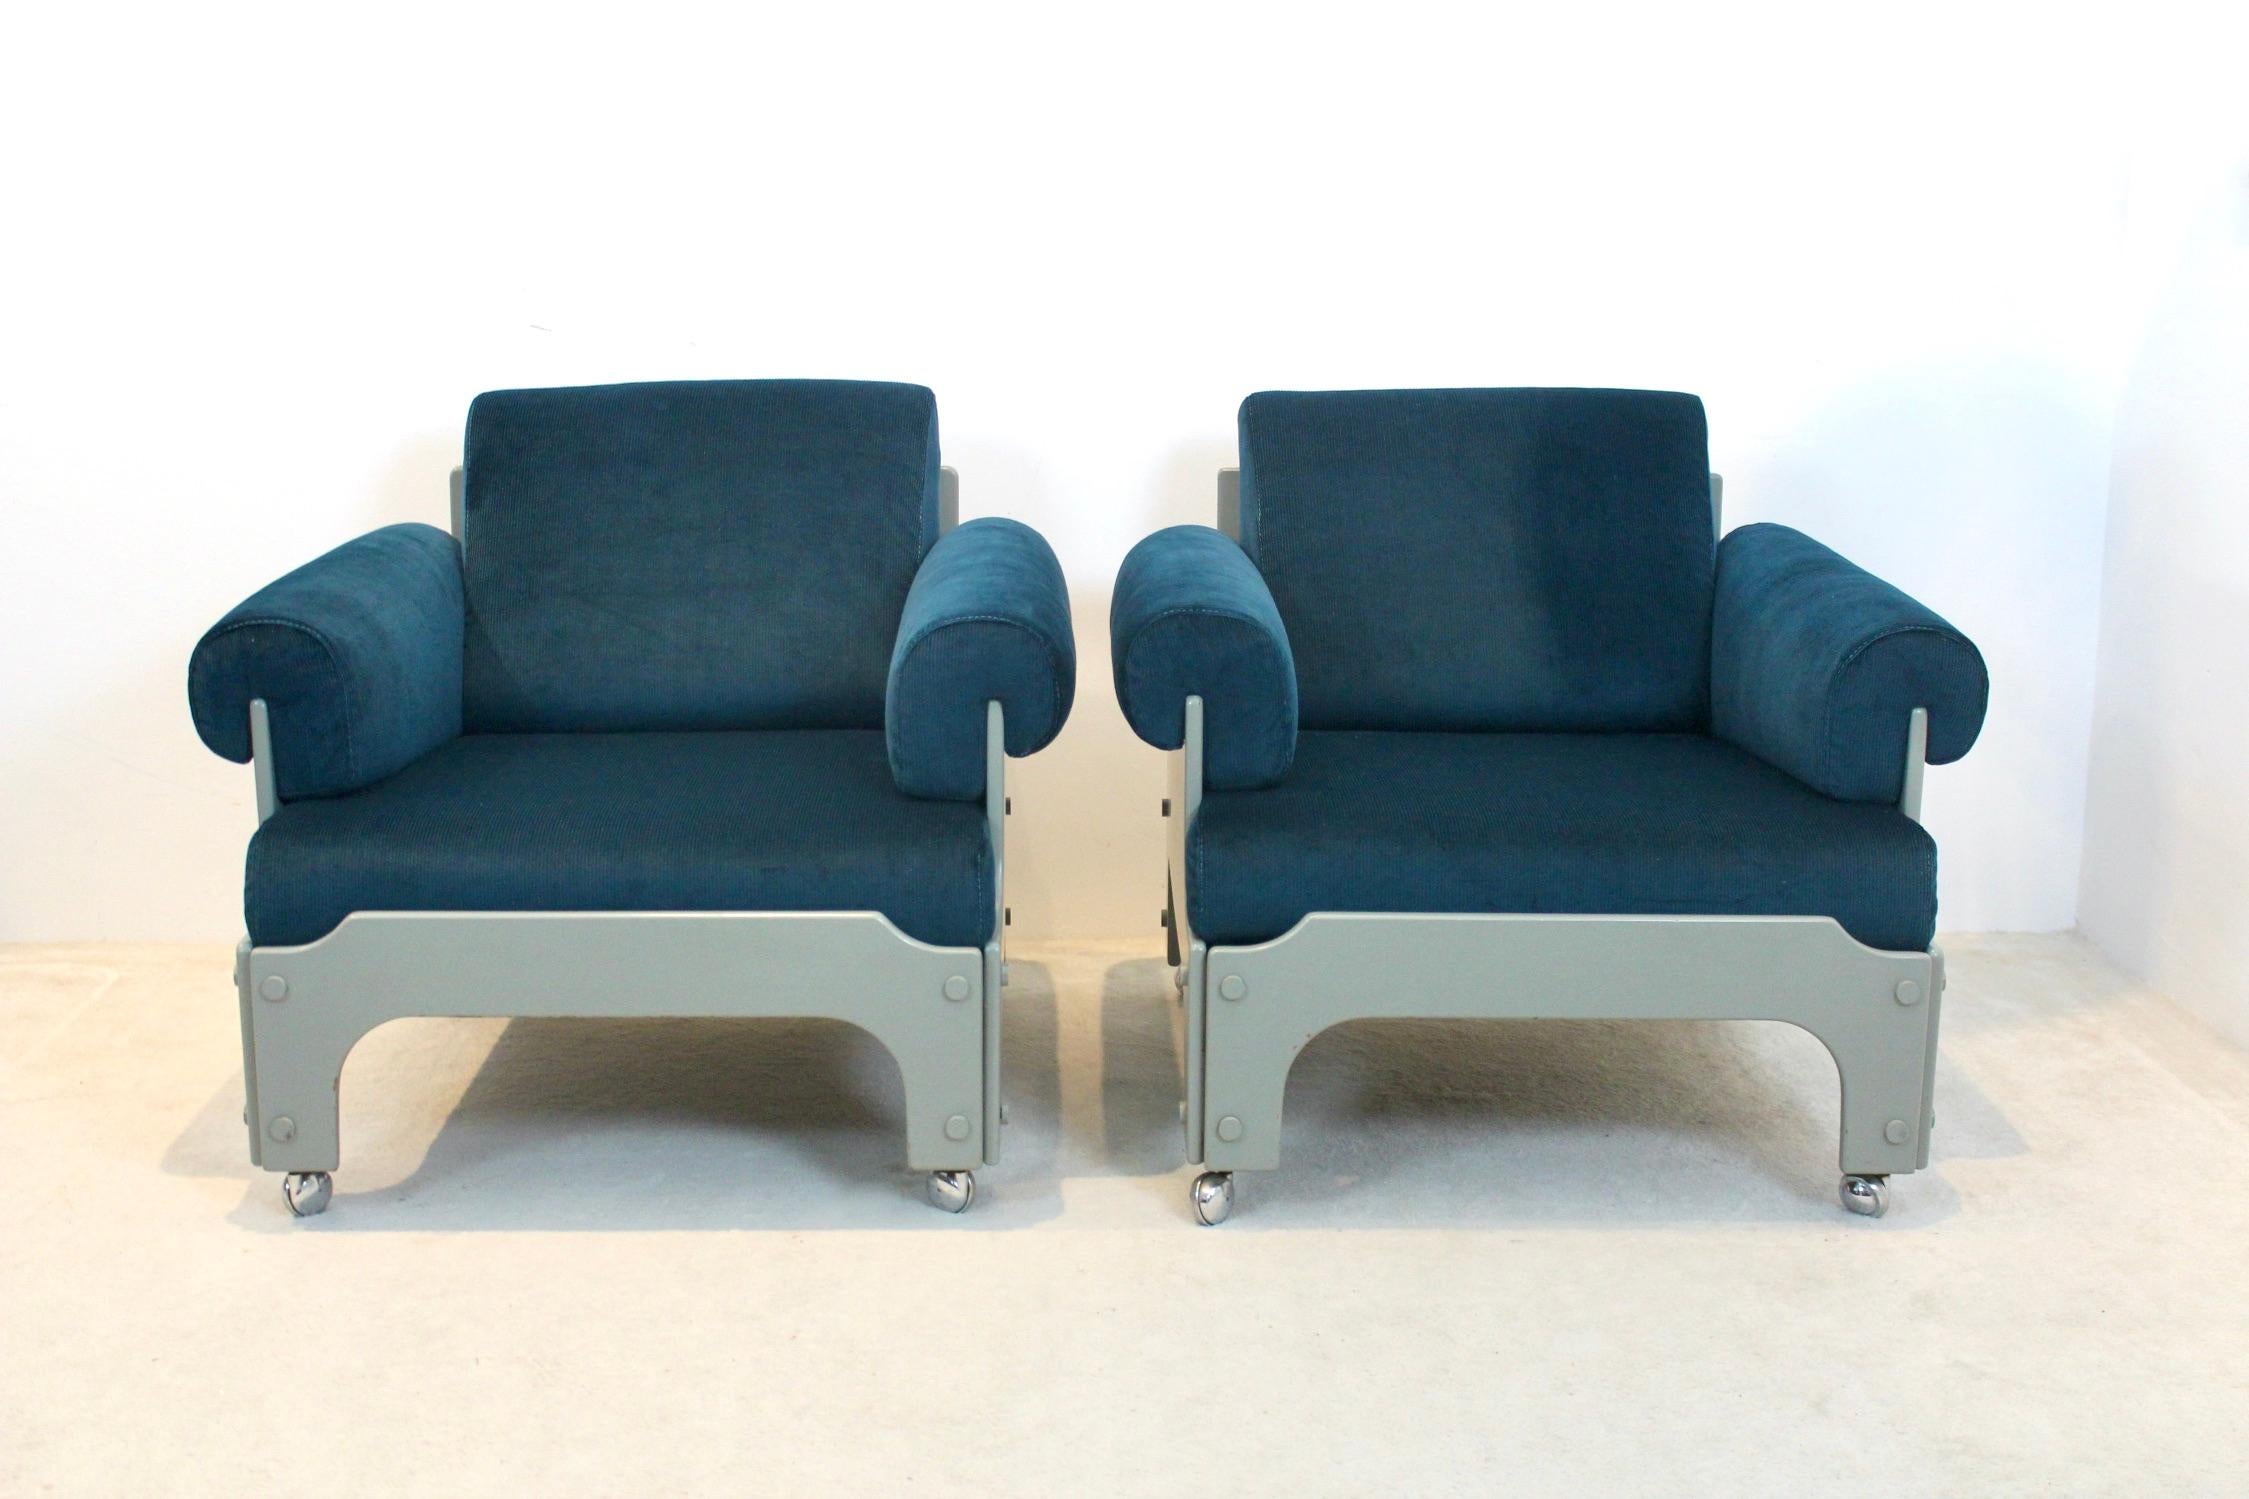 Very Rare SZ 85 Spectrum Easy Chairs by Jan Pieter Berghoef, 1968 For Sale 2